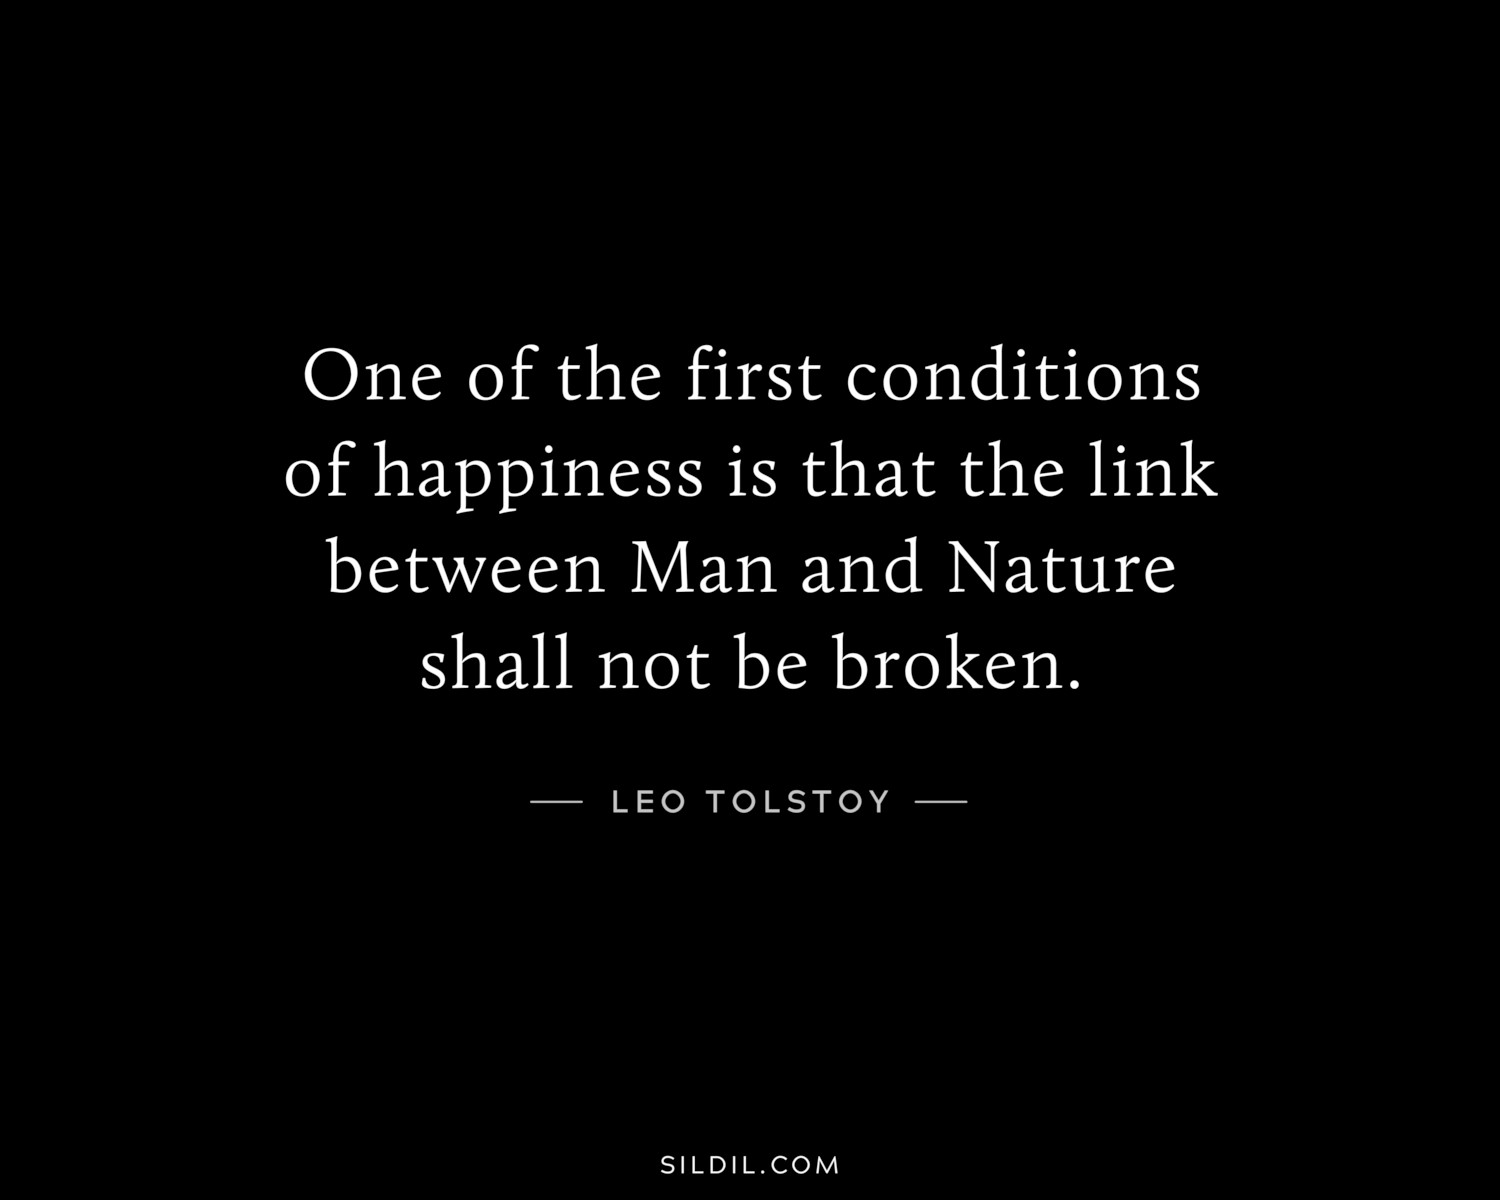 One of the first conditions of happiness is that the link between Man and Nature shall not be broken.